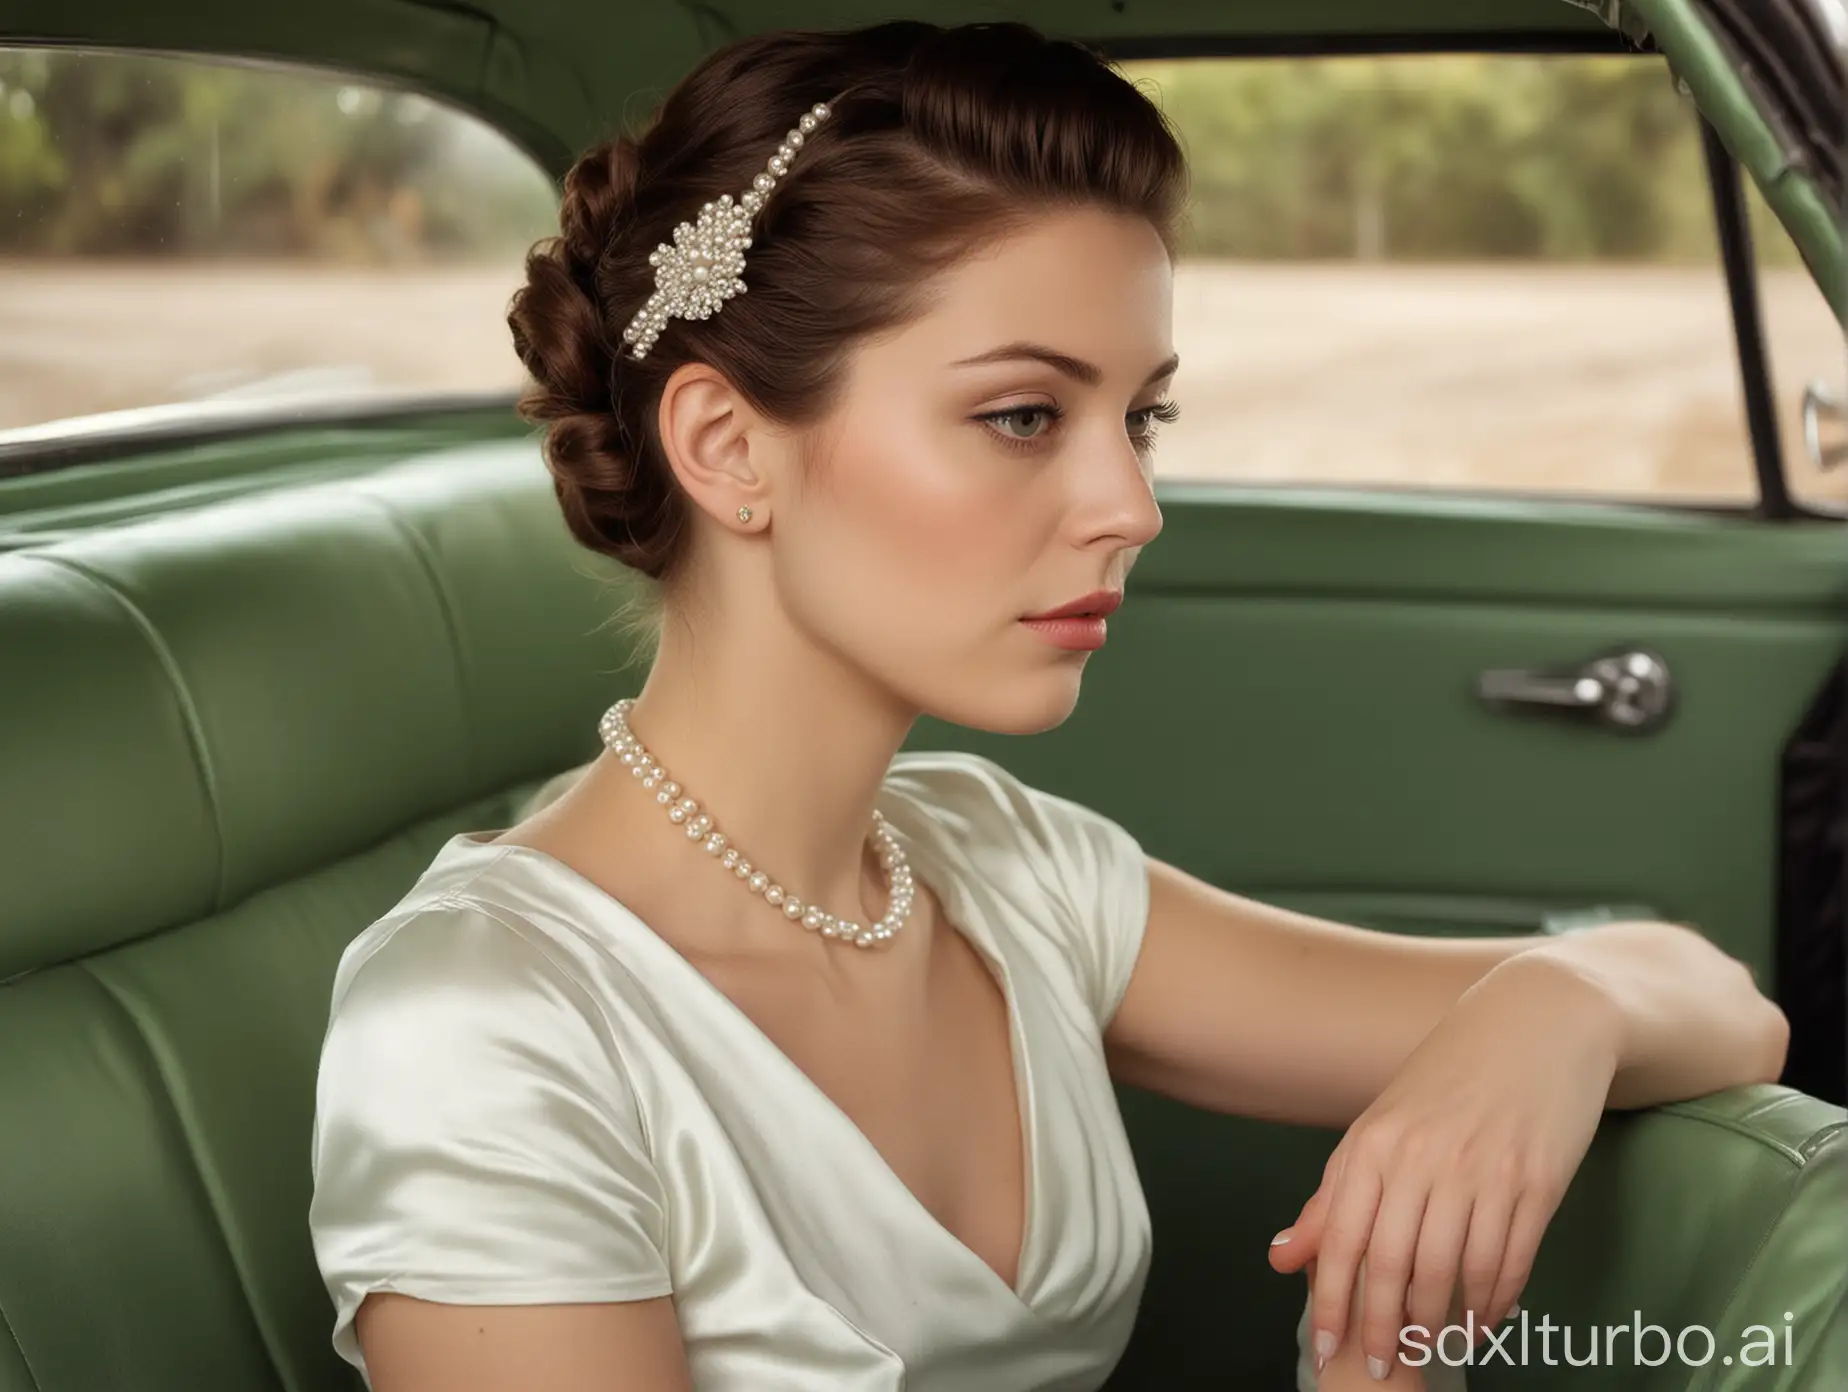 A captivating vintage-inspired image featuring a sophisticated woman seated in a charming green car. The woman, with an updo adorned by a pearl hair accessory, offers a profile view, displaying her serene and introspective expression. Her white satin or silk dress and multi-strand pearl necklace add a touch of classic elegance. The car's interior is pristine white, creating a striking contrast against the soft, warm lighting that enhances the colors and textures within the frame.